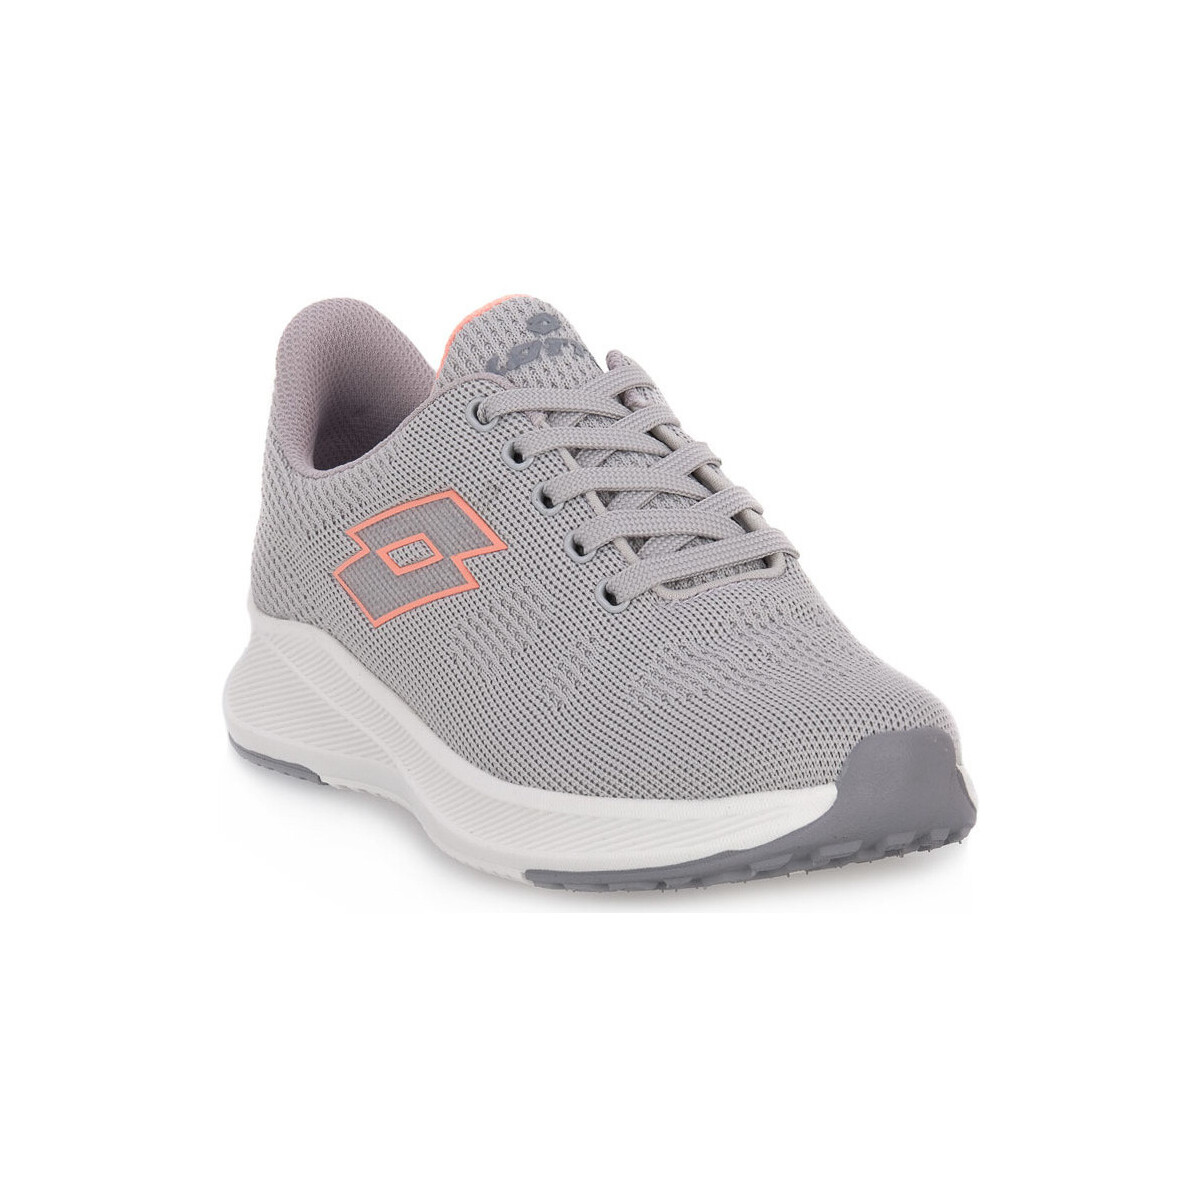 Chaussures Femme Baskets mode Lotto A2Z EVO 1000 Gris